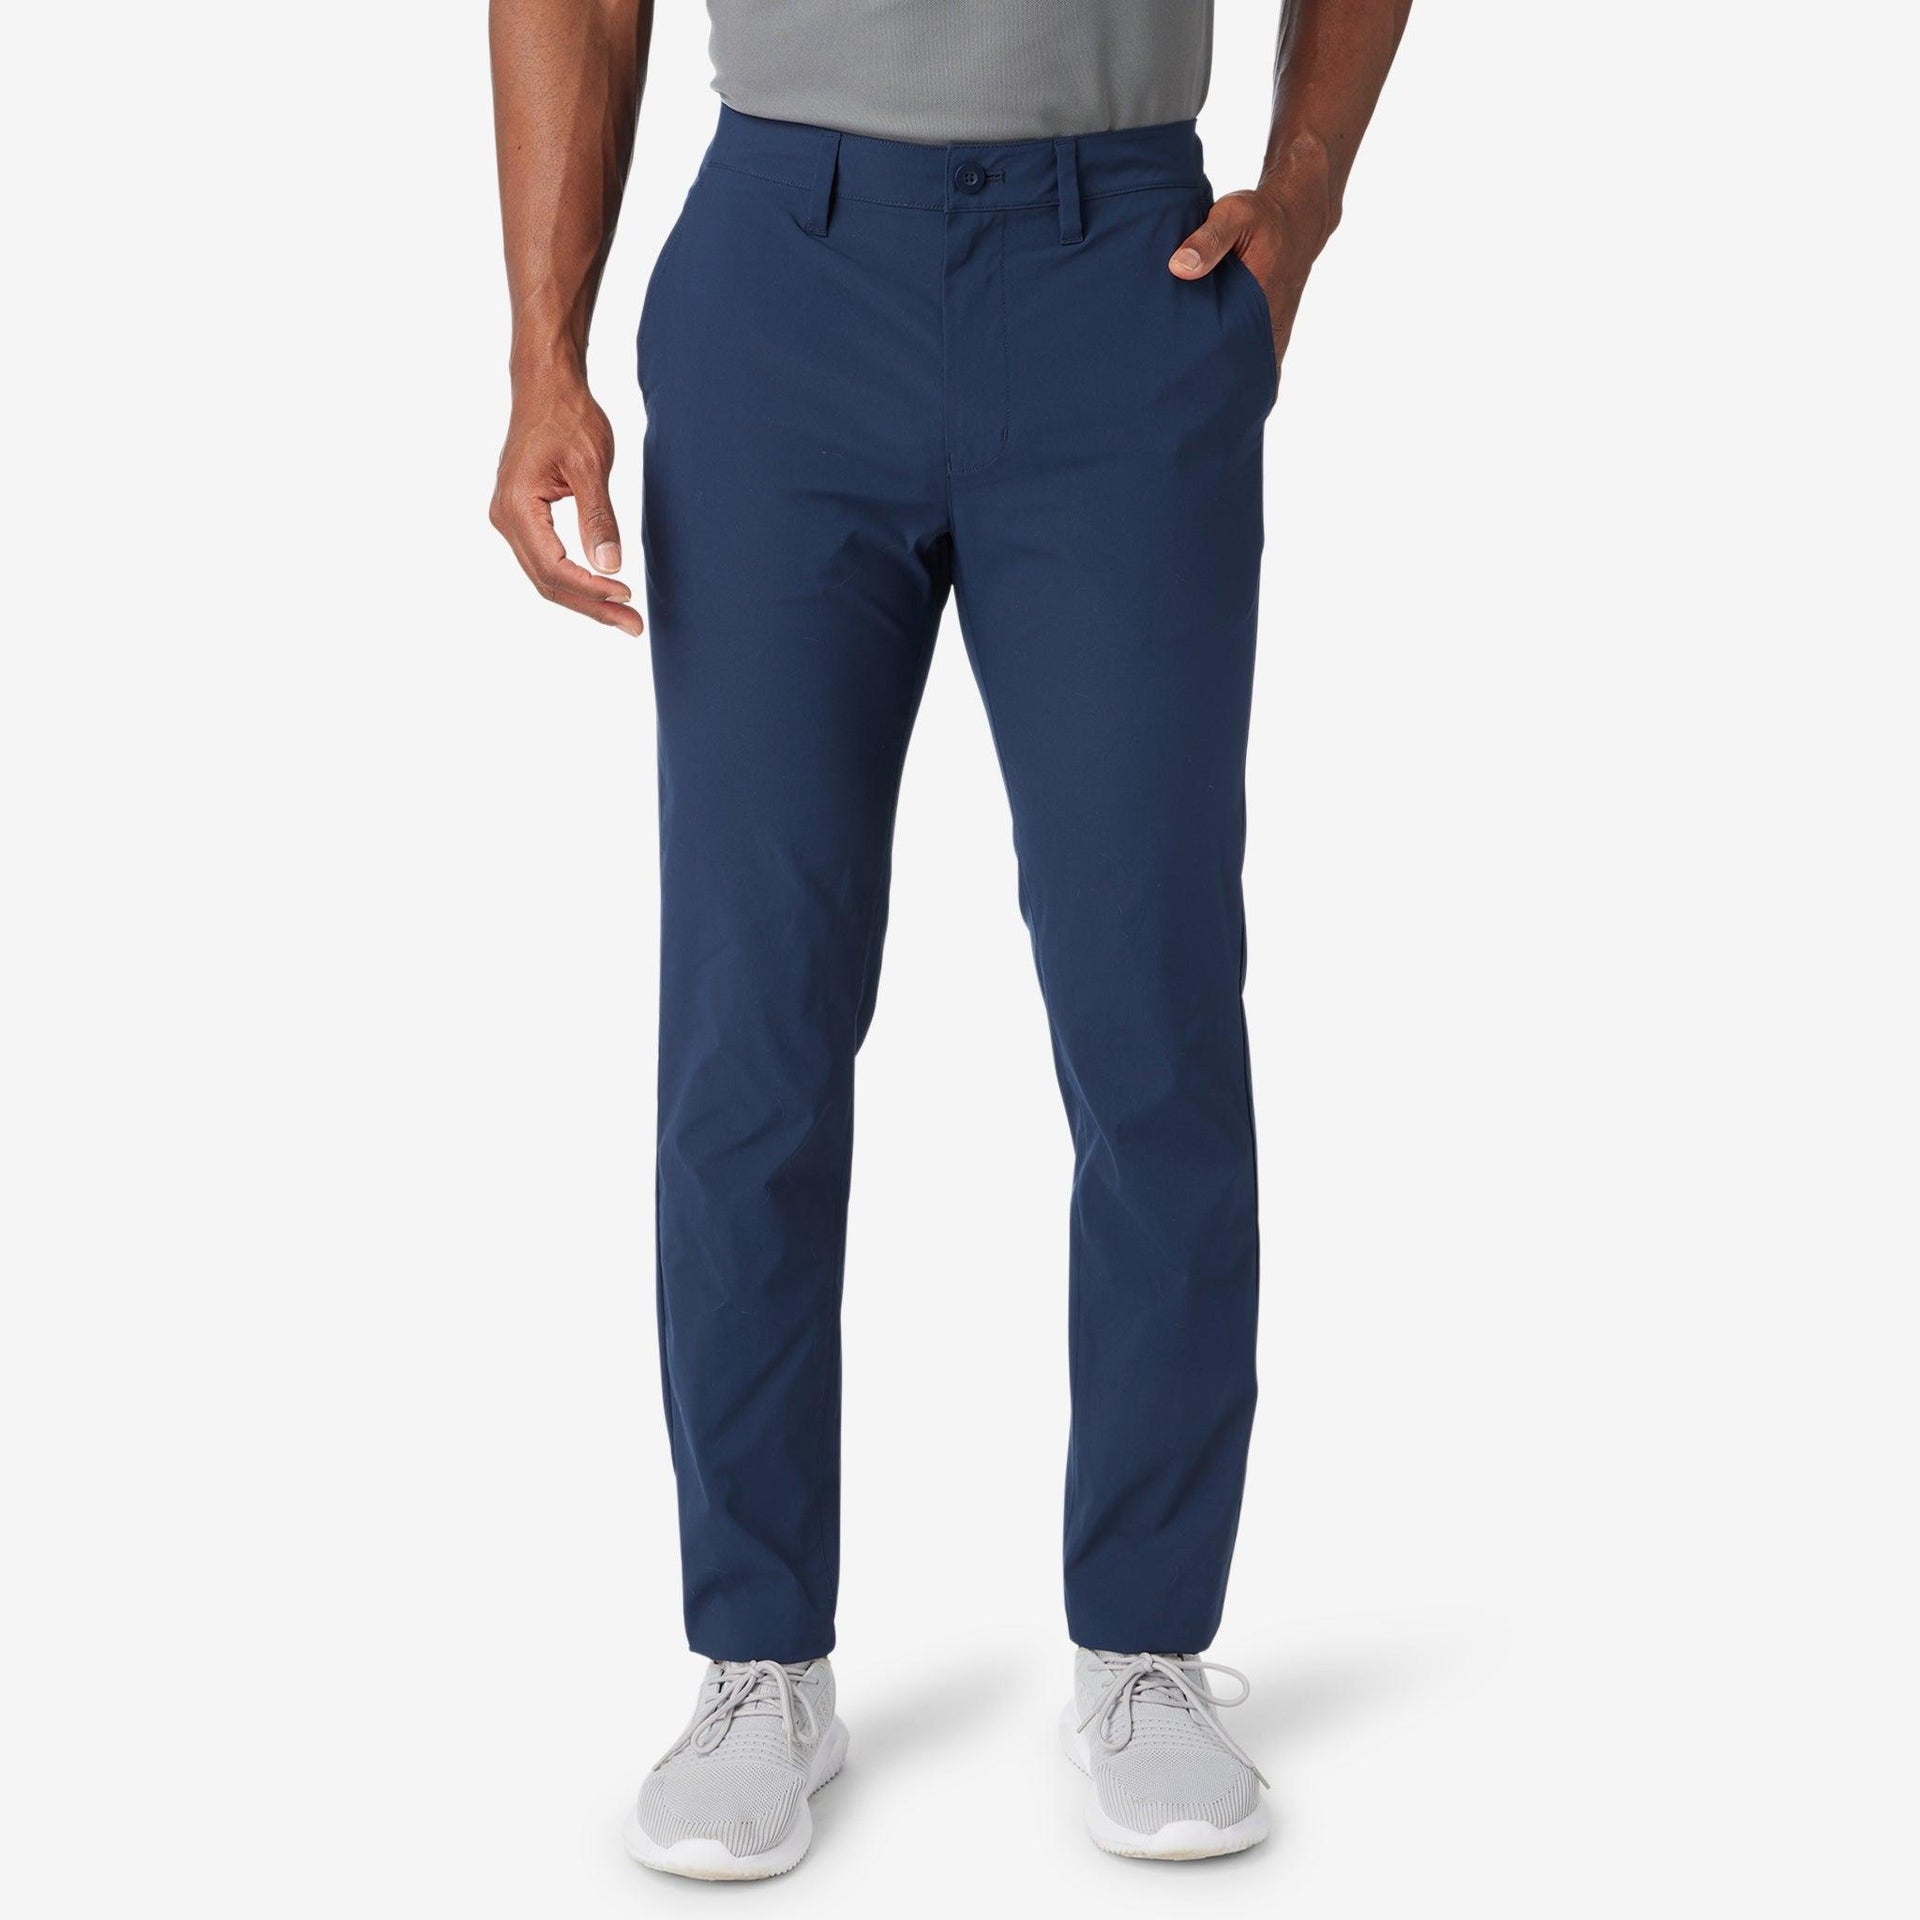 clubhouse pant Navy 32x30